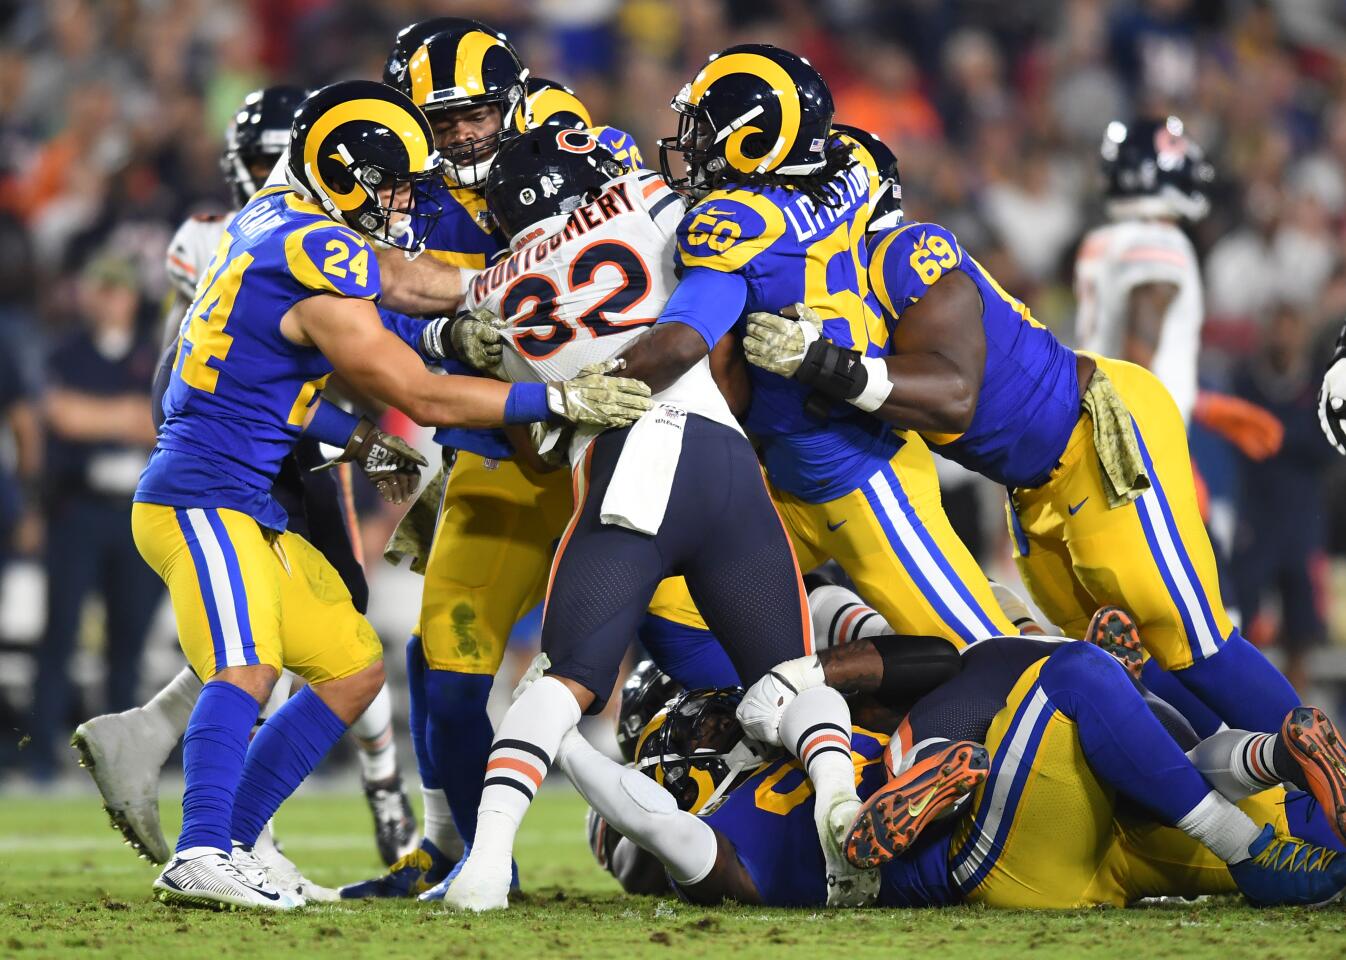 Bears running back David Montgomery is stopped by the Rams' defense.